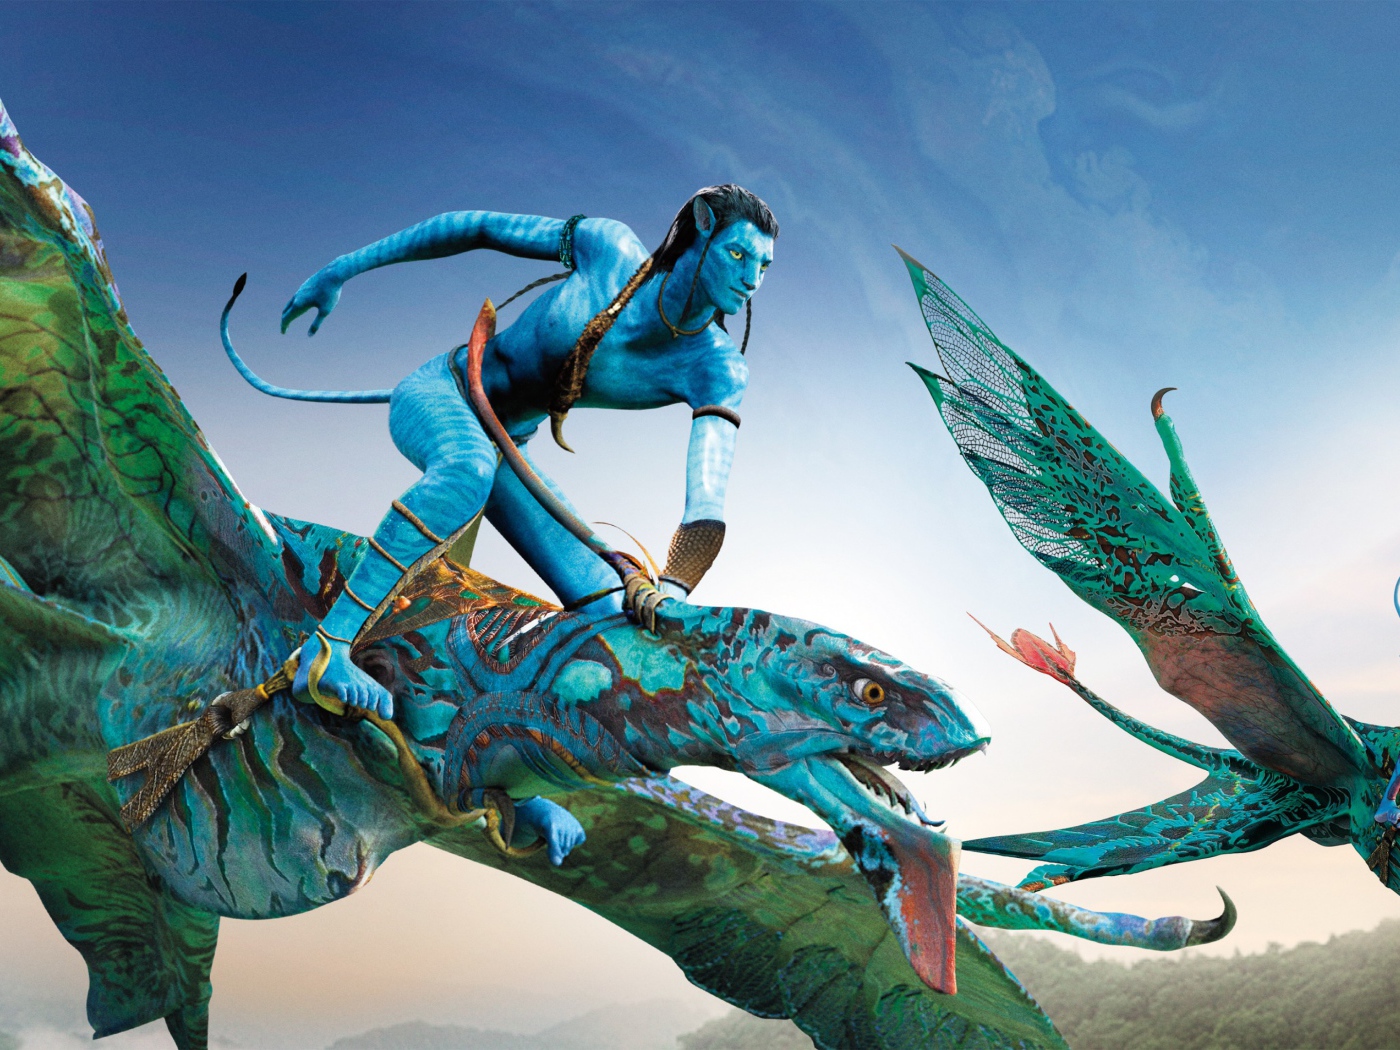 The characters of Neytiri and Jake Sully in the movie Avatar